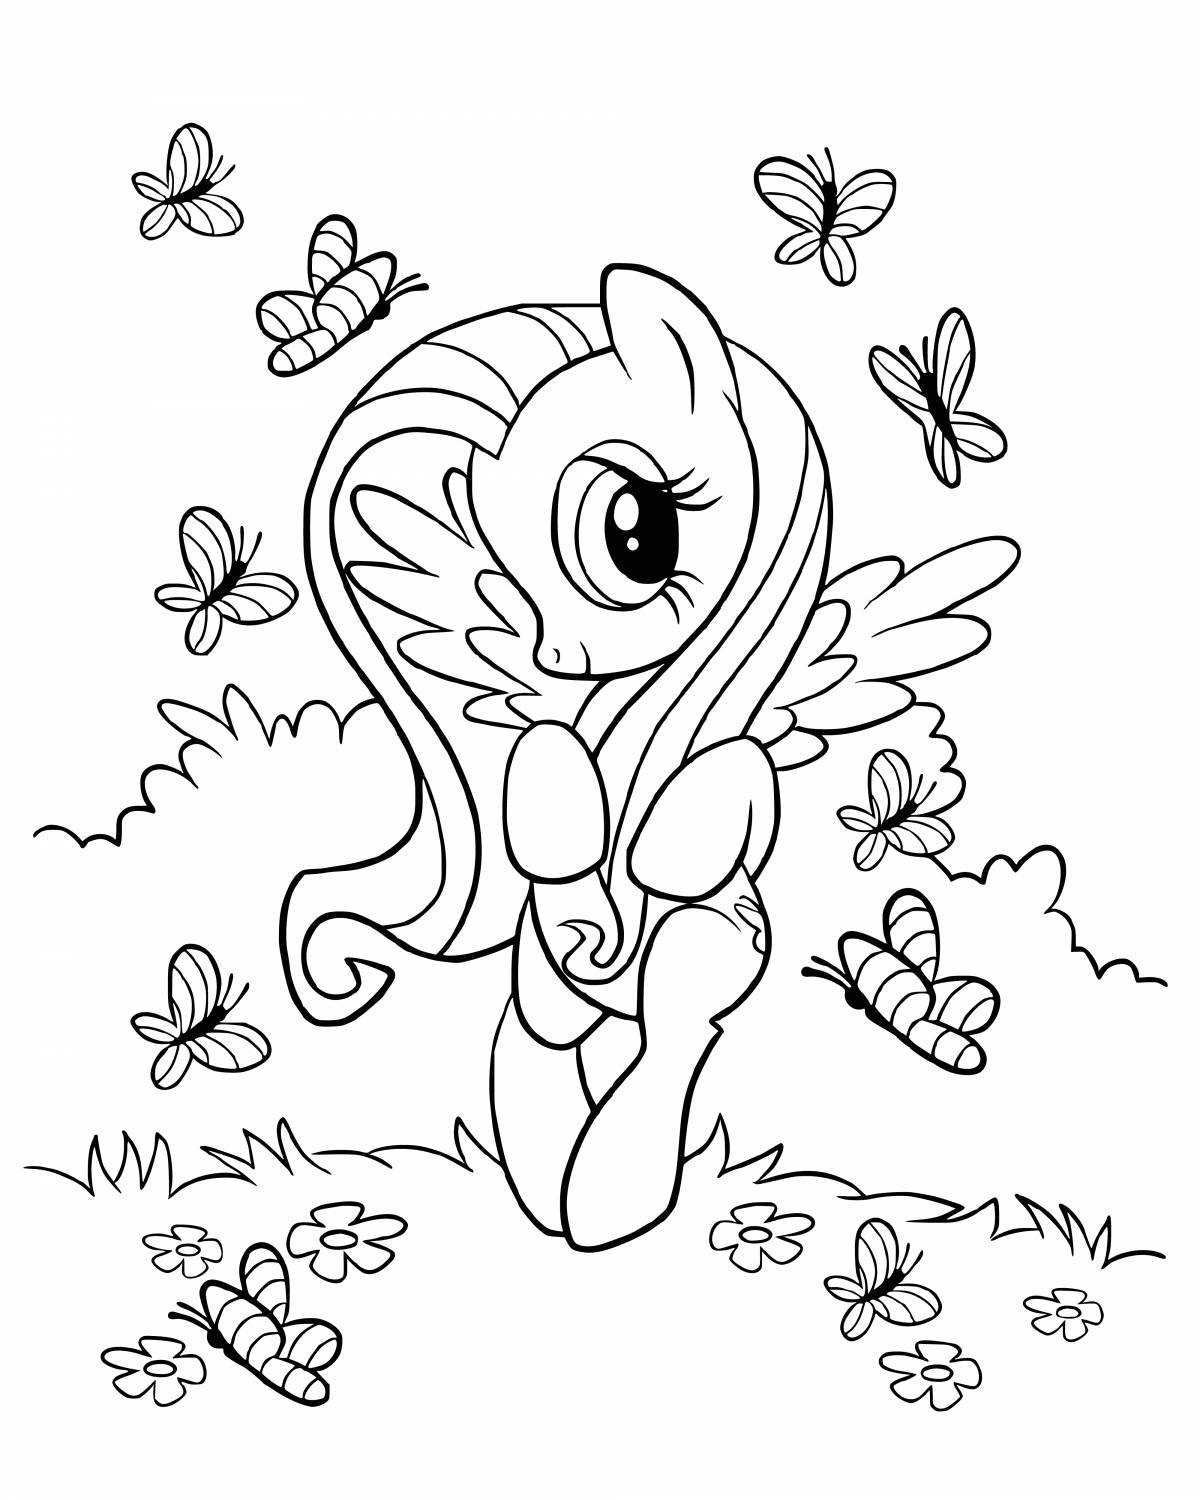 Amazing fluttershy coloring book